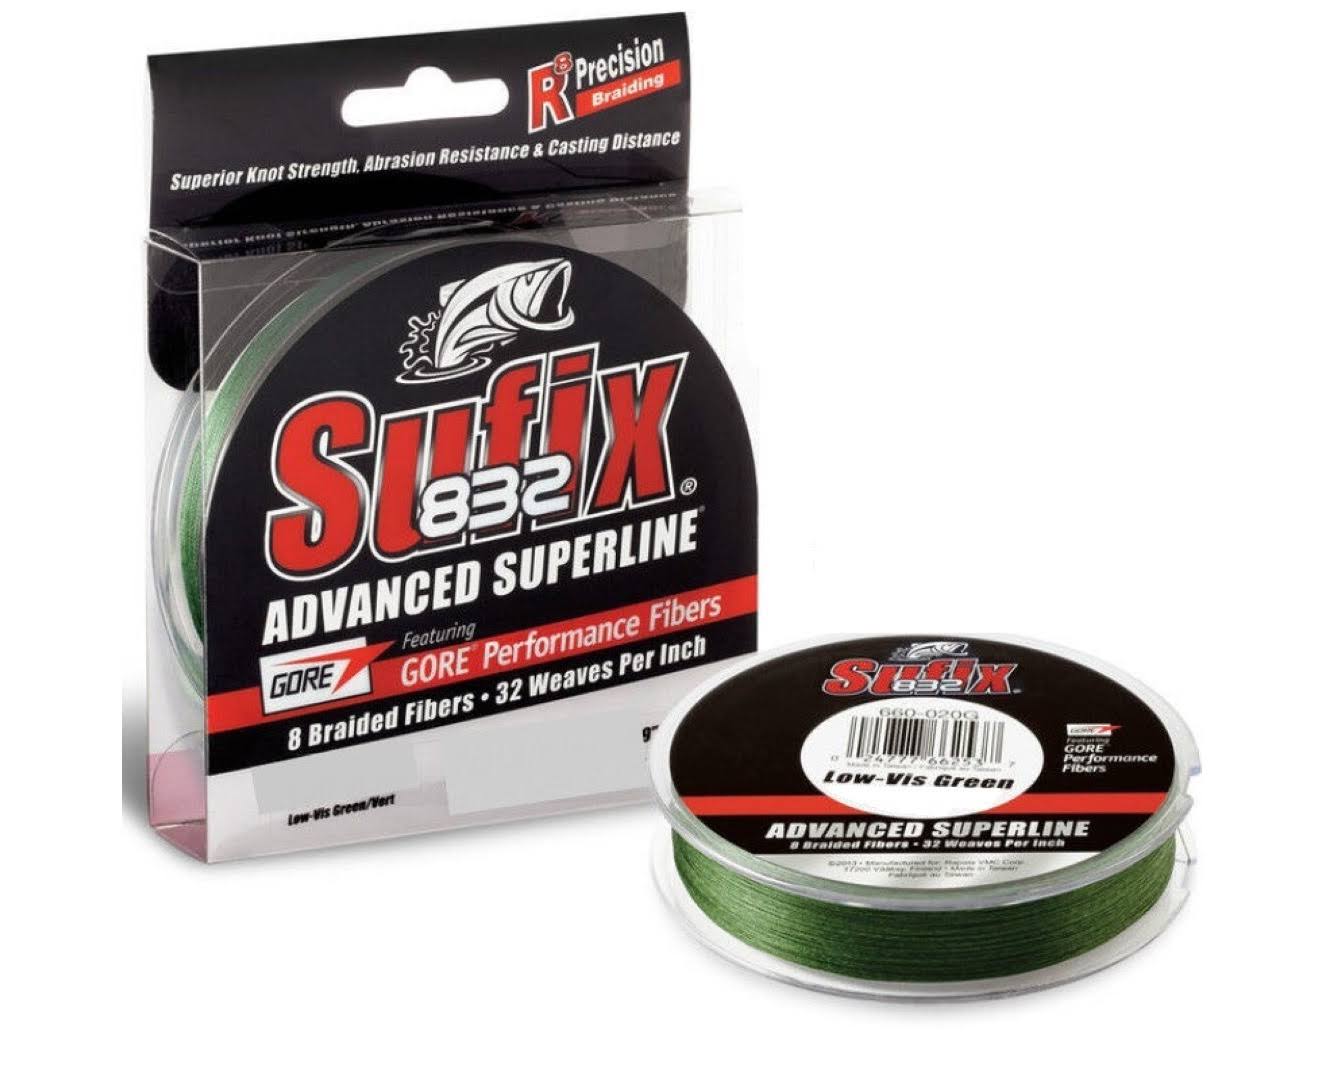 Sufix Advanced Superline Braid - Low Visibility Green, 300yds